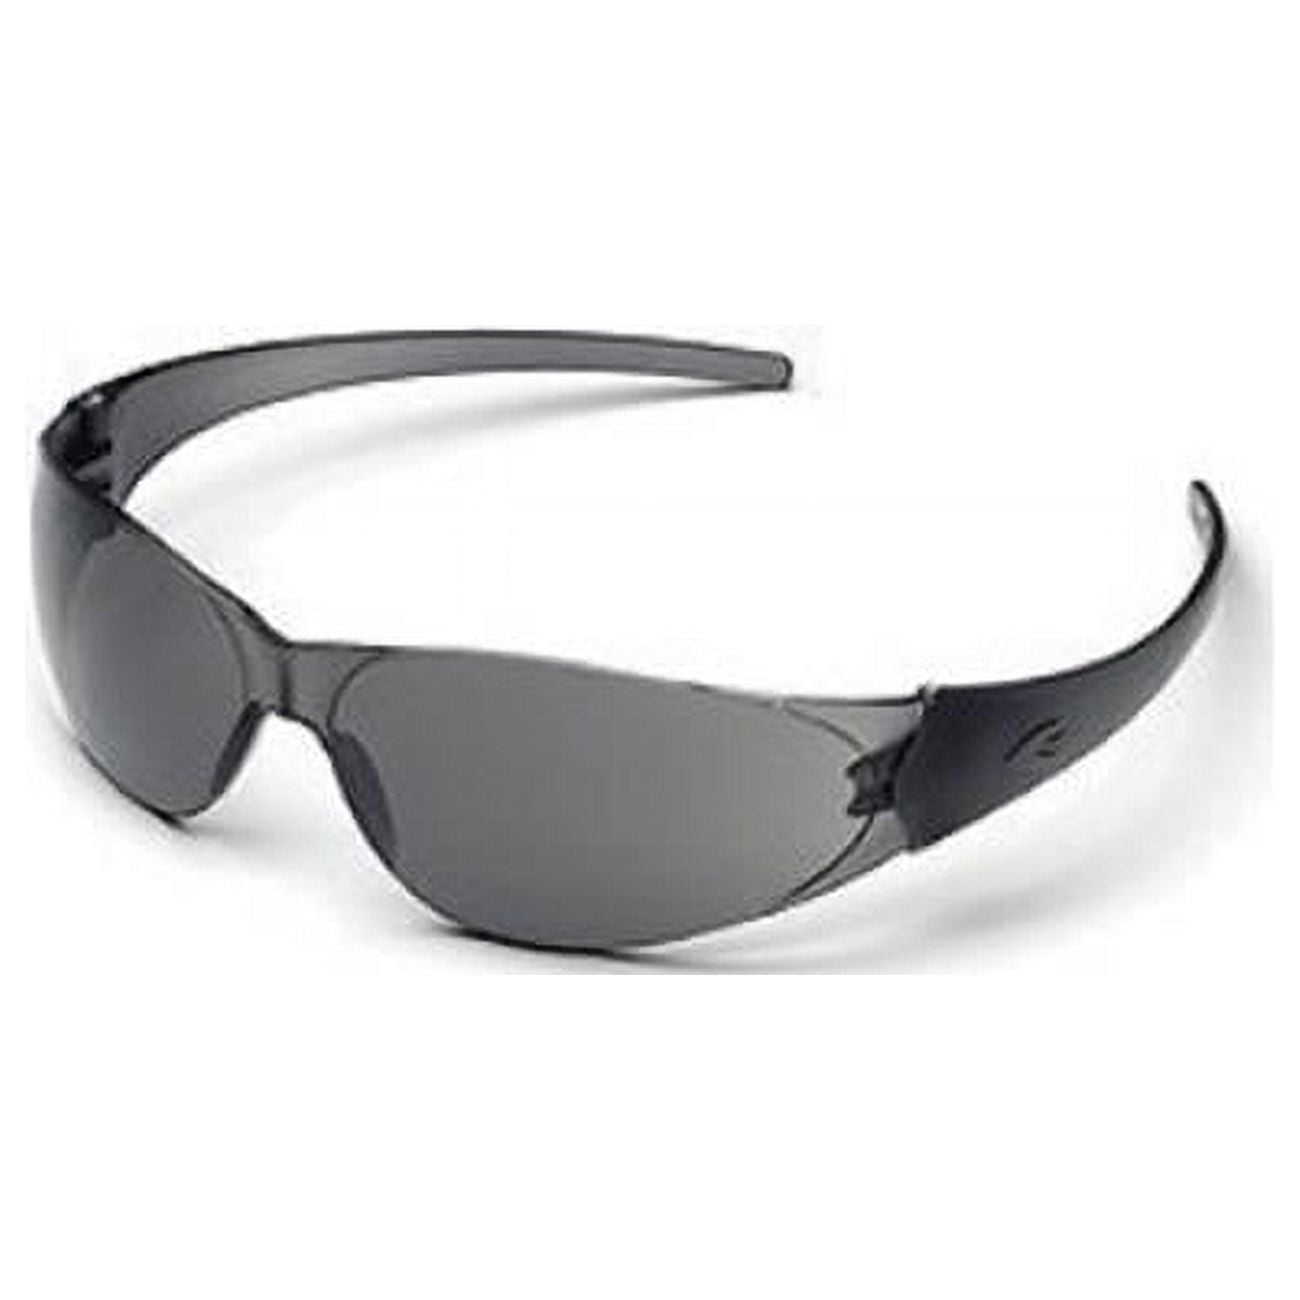 Ck112 Checkmate. Safety Glasses Coated Gray Lens Gray Frame